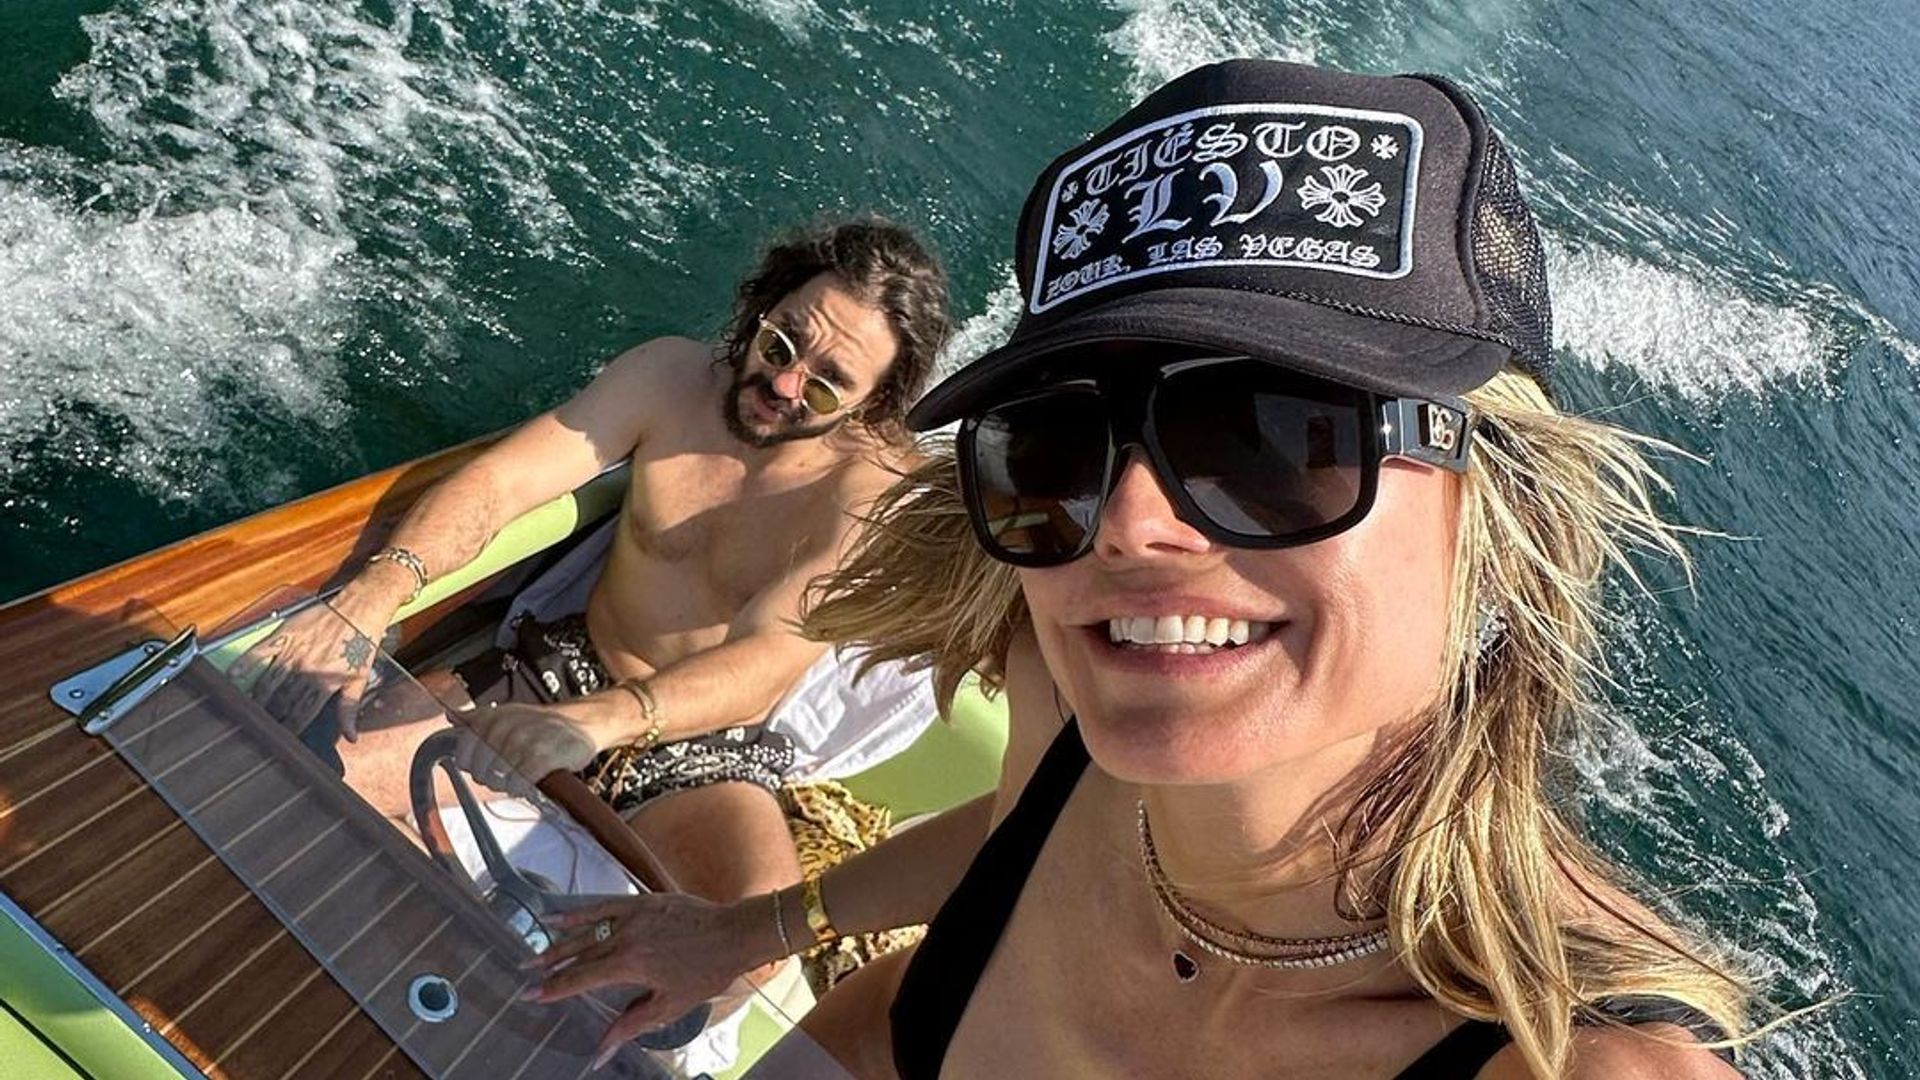 Heidi Klum and her husband Tom Kaulitz on a boat on vacation in Italy